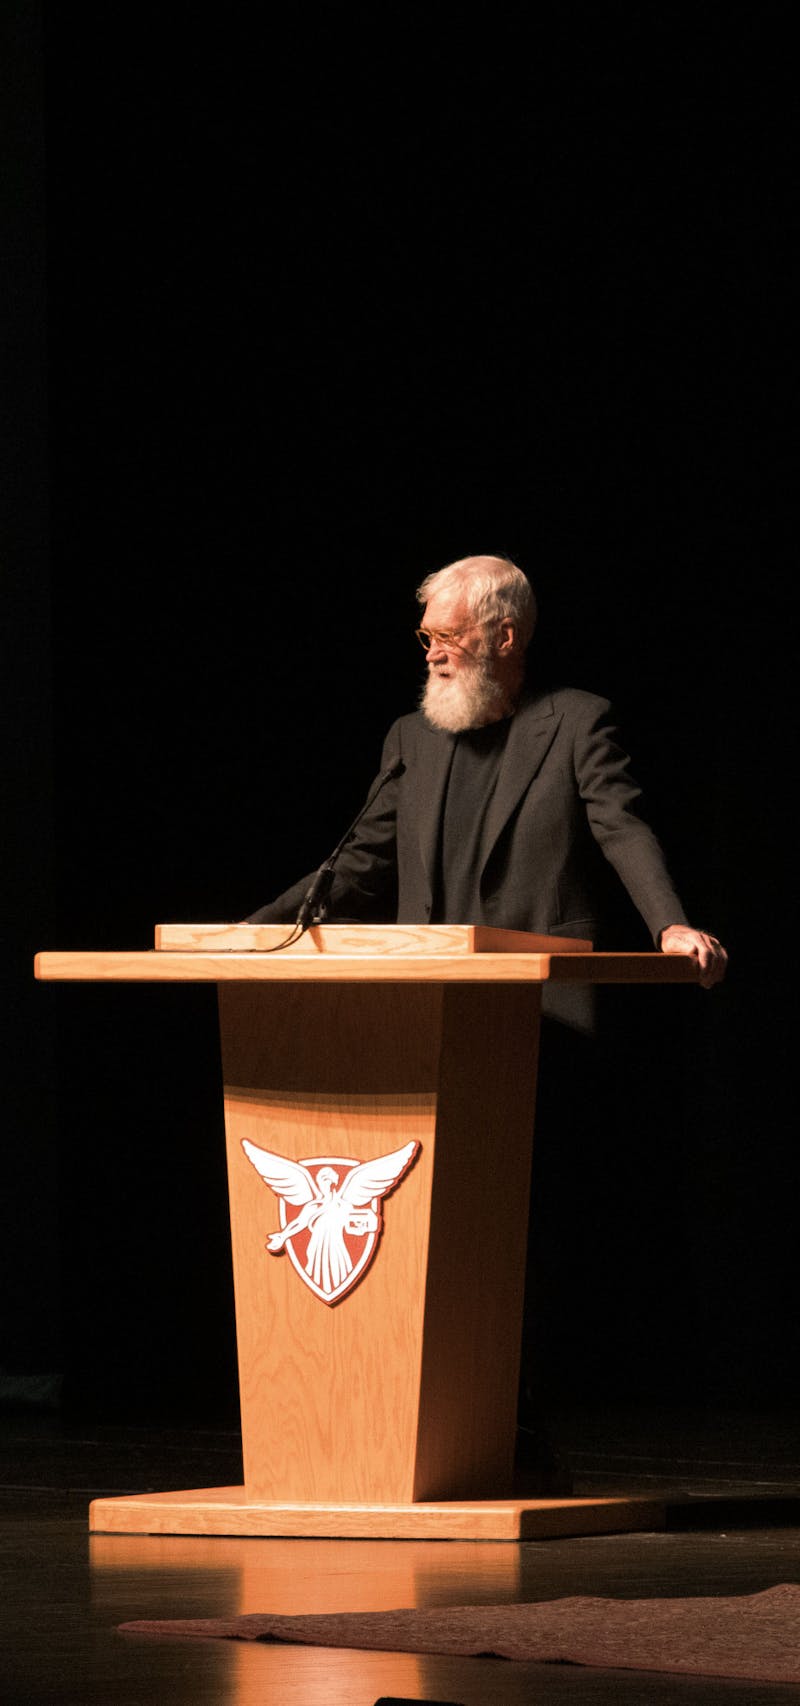 David Letterman comes to campus to present “Clear Reception” documentary